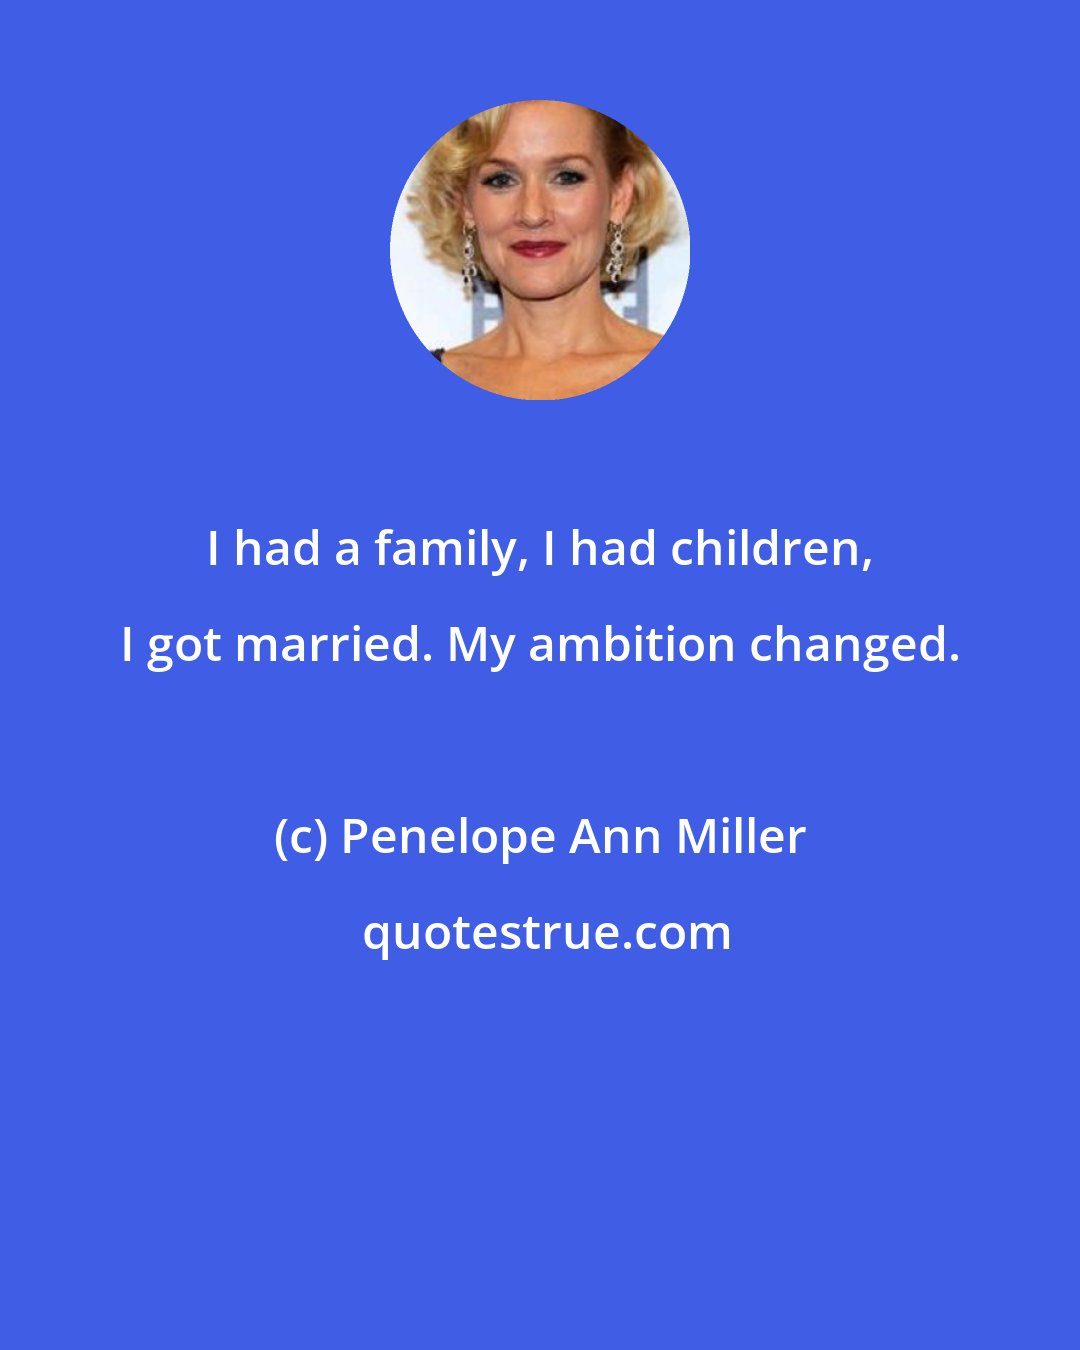 Penelope Ann Miller: I had a family, I had children, I got married. My ambition changed.